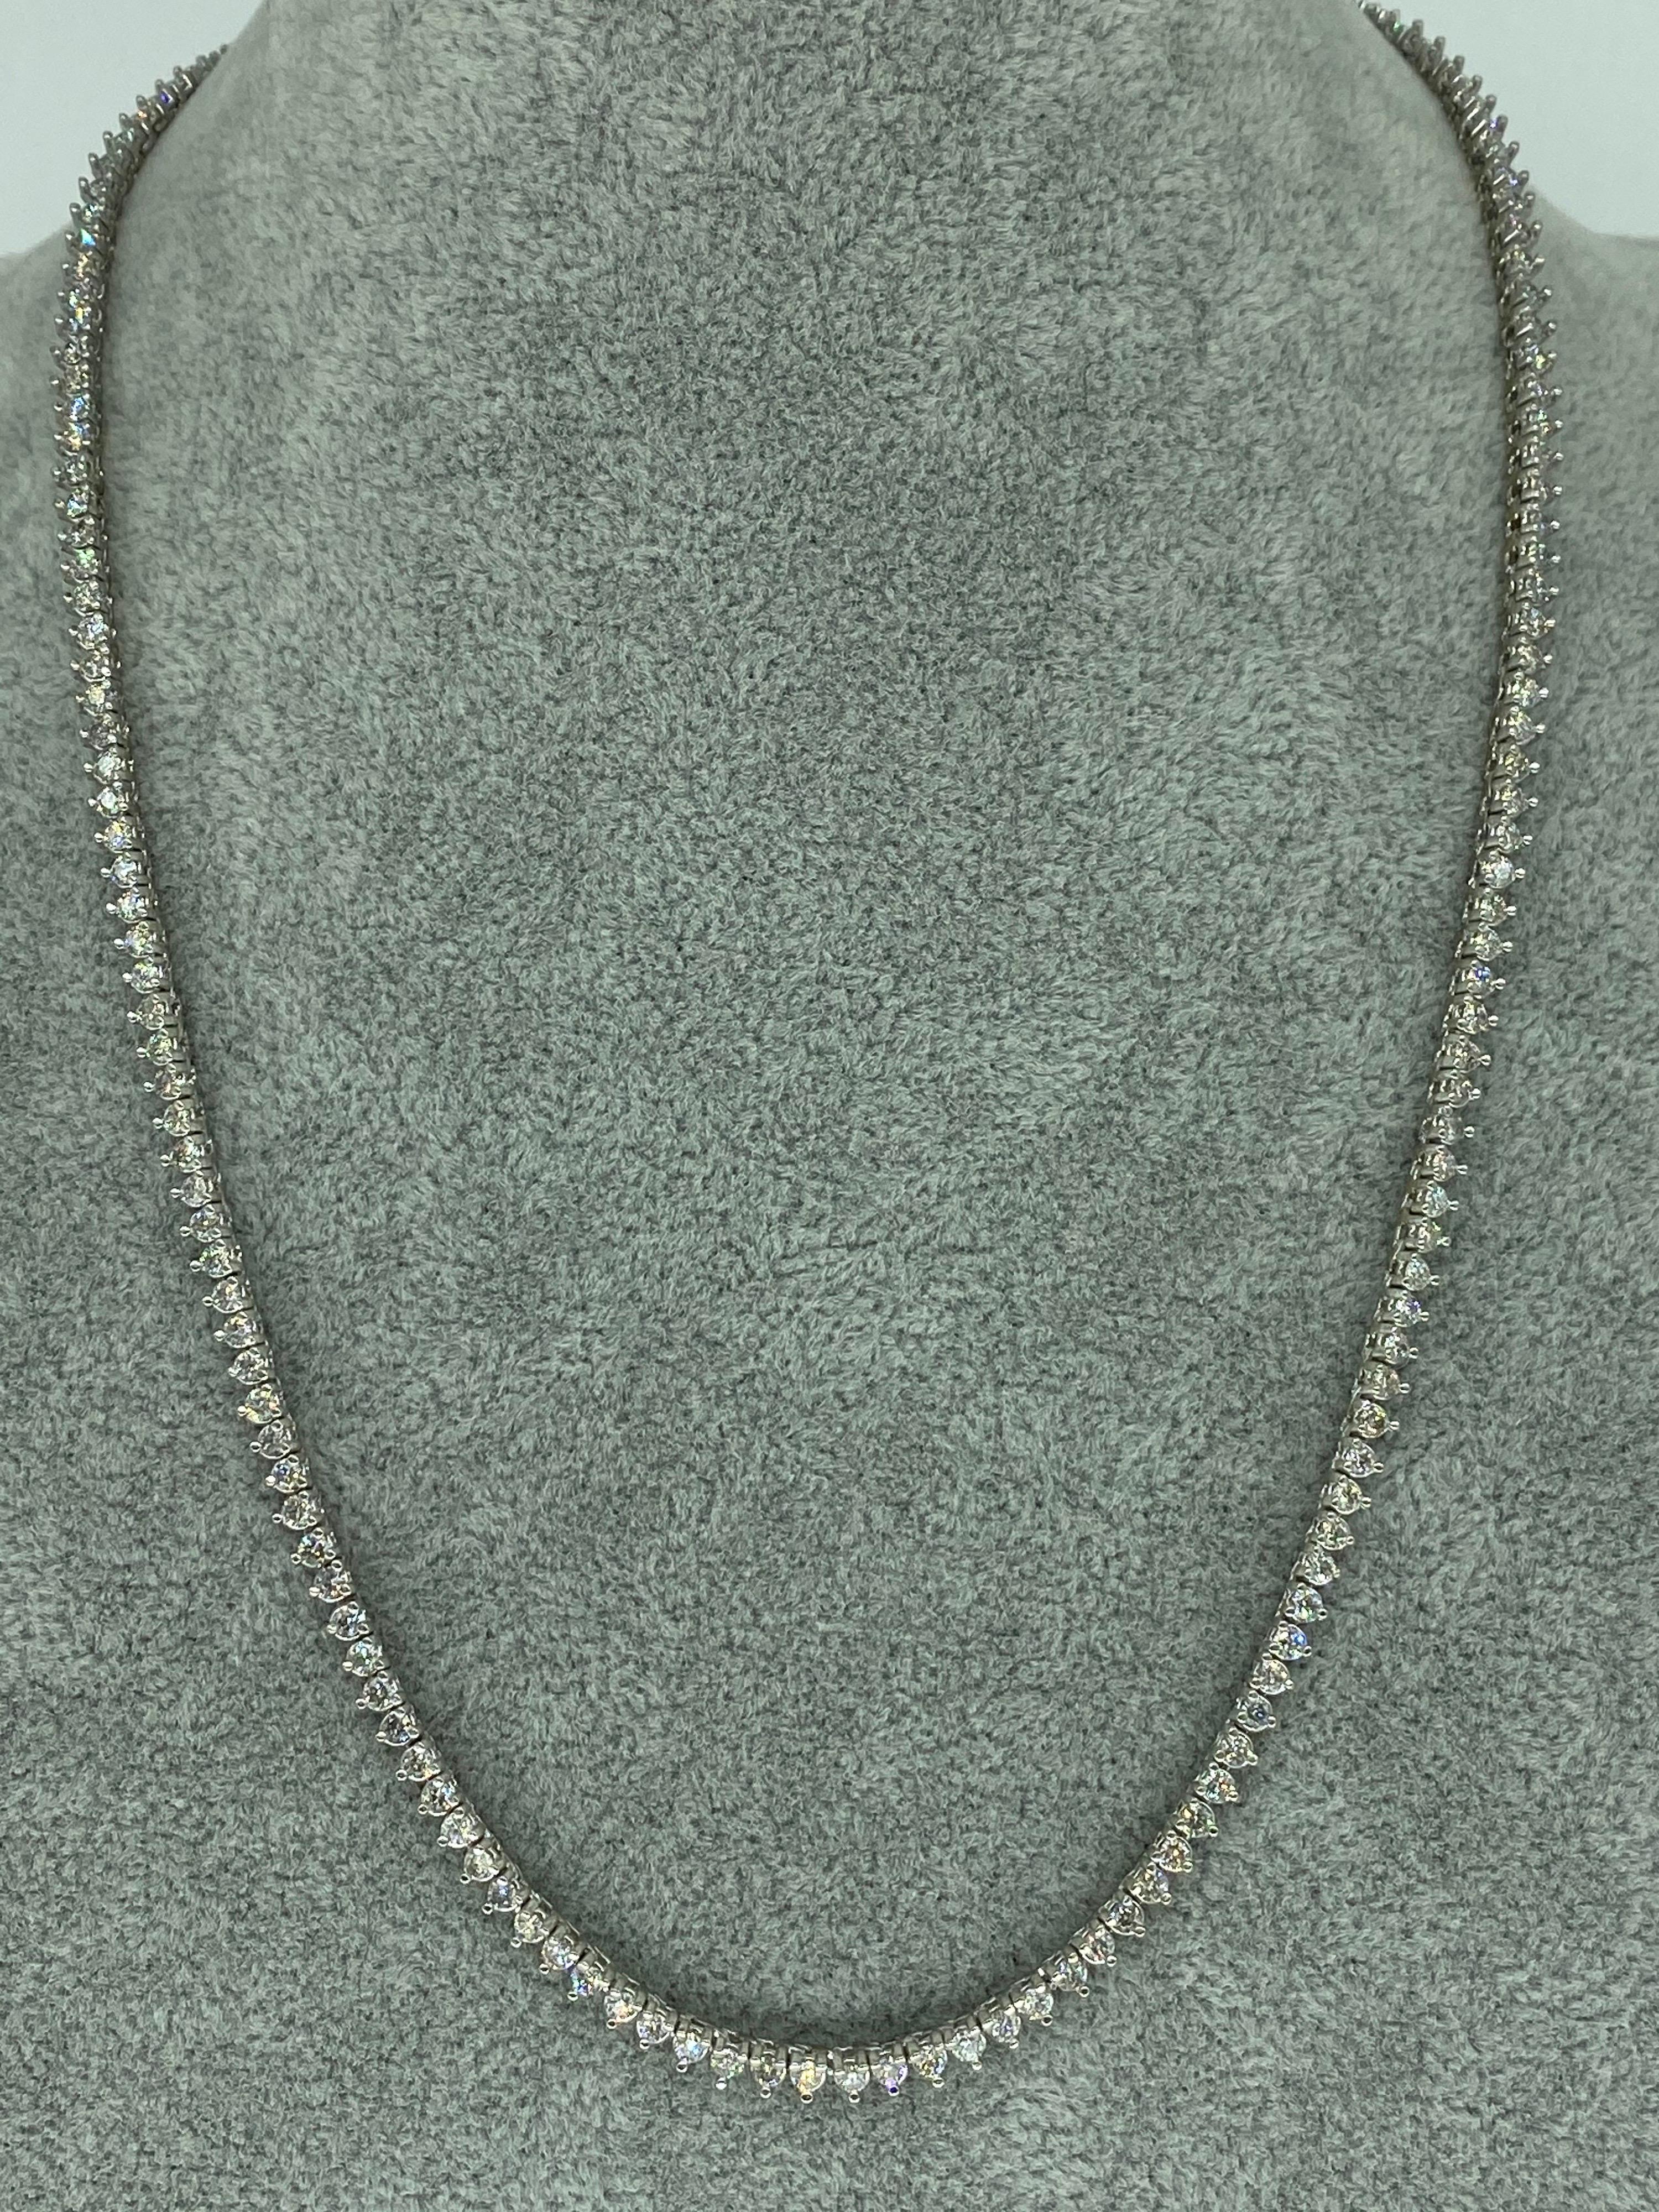 Vintage 10.80 Carat Diamond Martini Tennis Necklace. The Diamonds features are natural SI1/SI2 round in a martini setting. Beautiful white diamonds dancing in the light. Each diamond is approx 0.06ct with approx 180 total diamonds. The necklace is